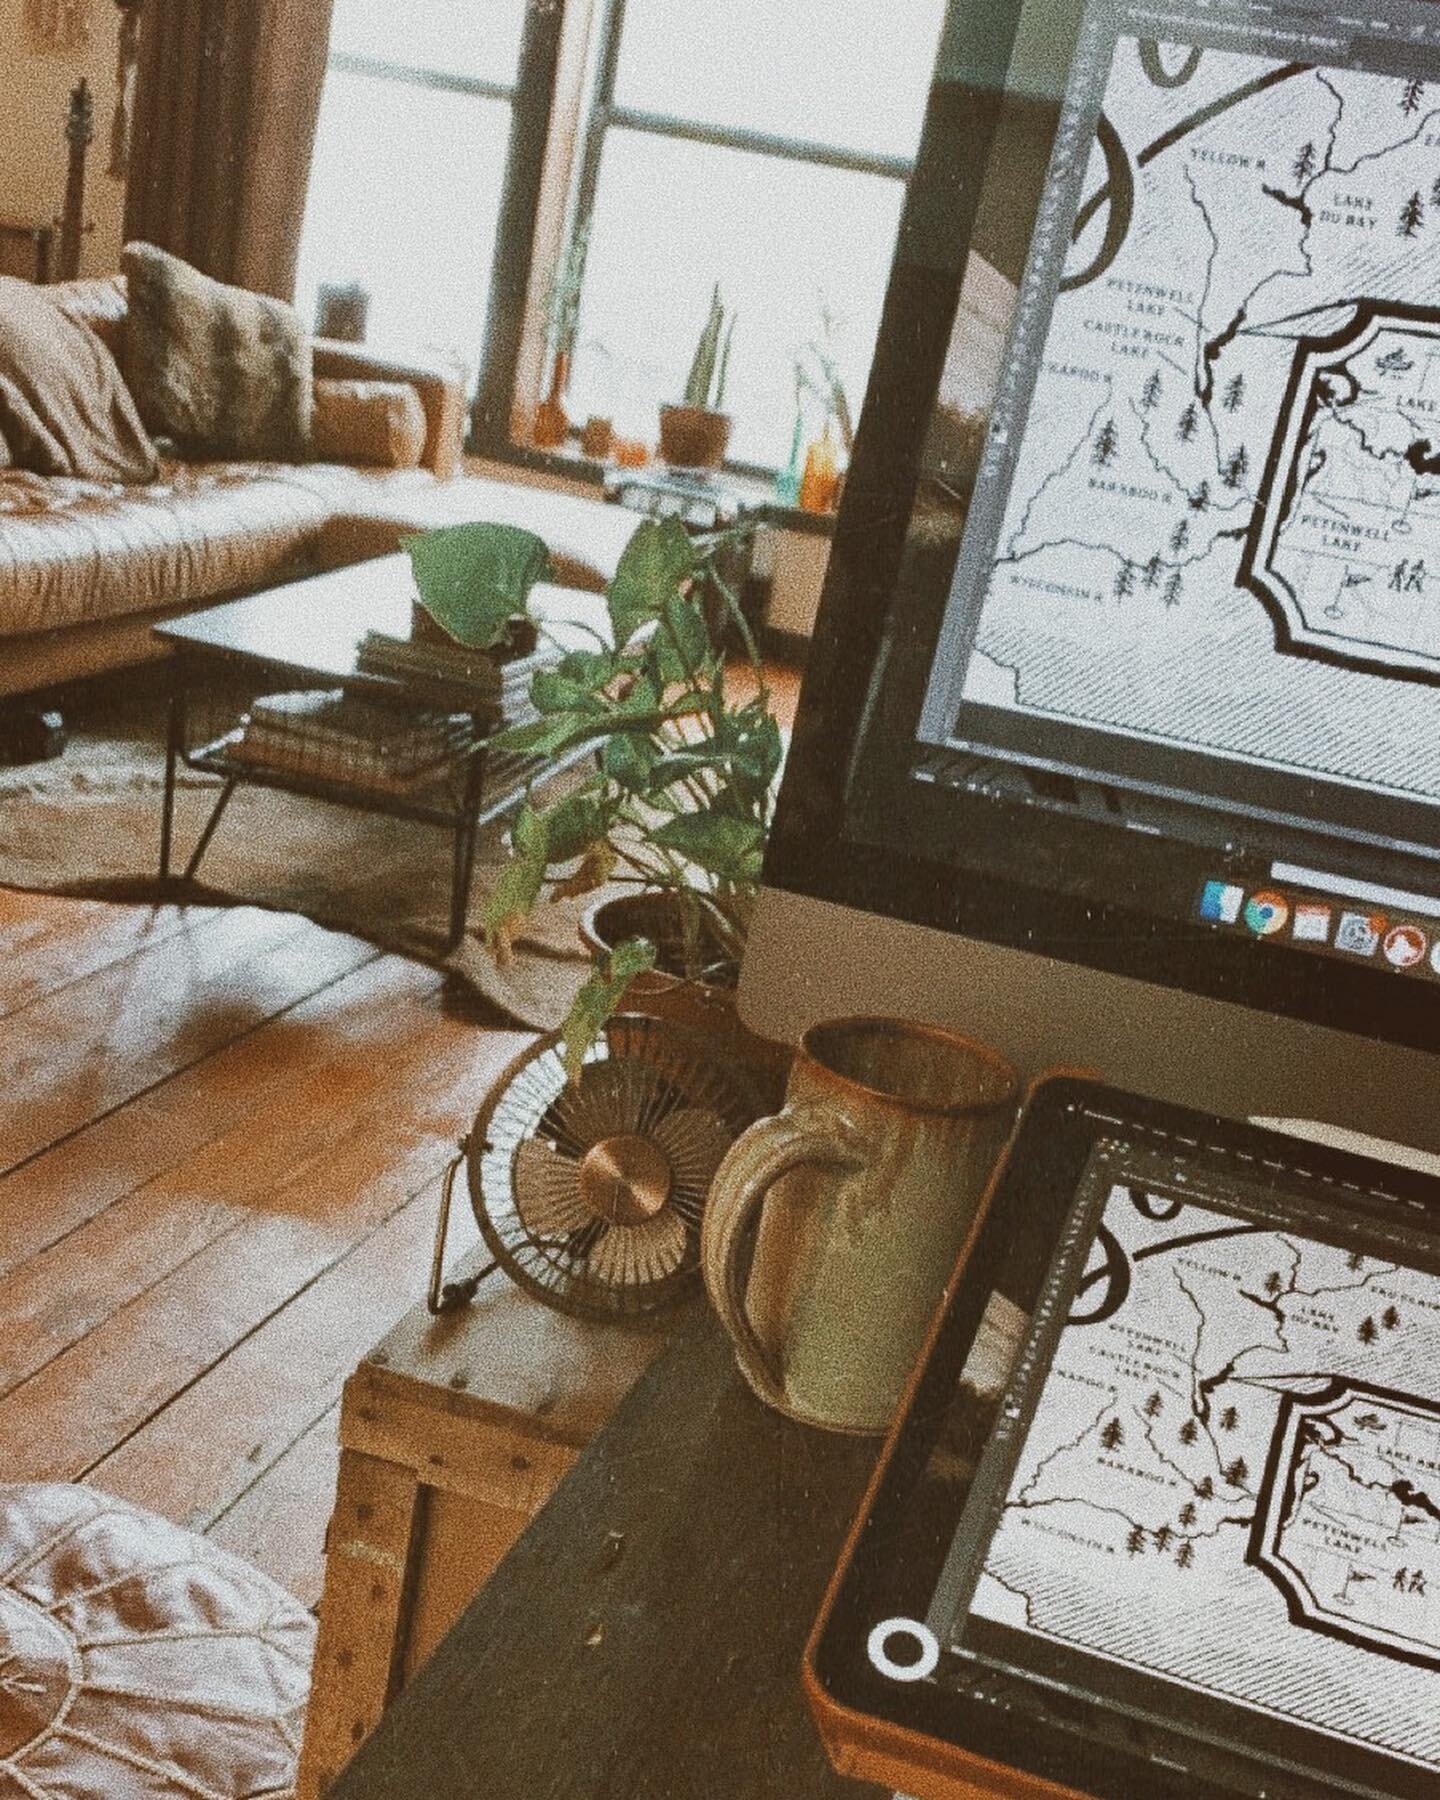 Old workspace setup. 🌿Miss the rustic vibe of this historical apartment &amp; the huge brick wall &amp; original smoke-shop mural. 

The second image shows puppy Remy trying to prevent me from working by stealing my seat 🤪🧡